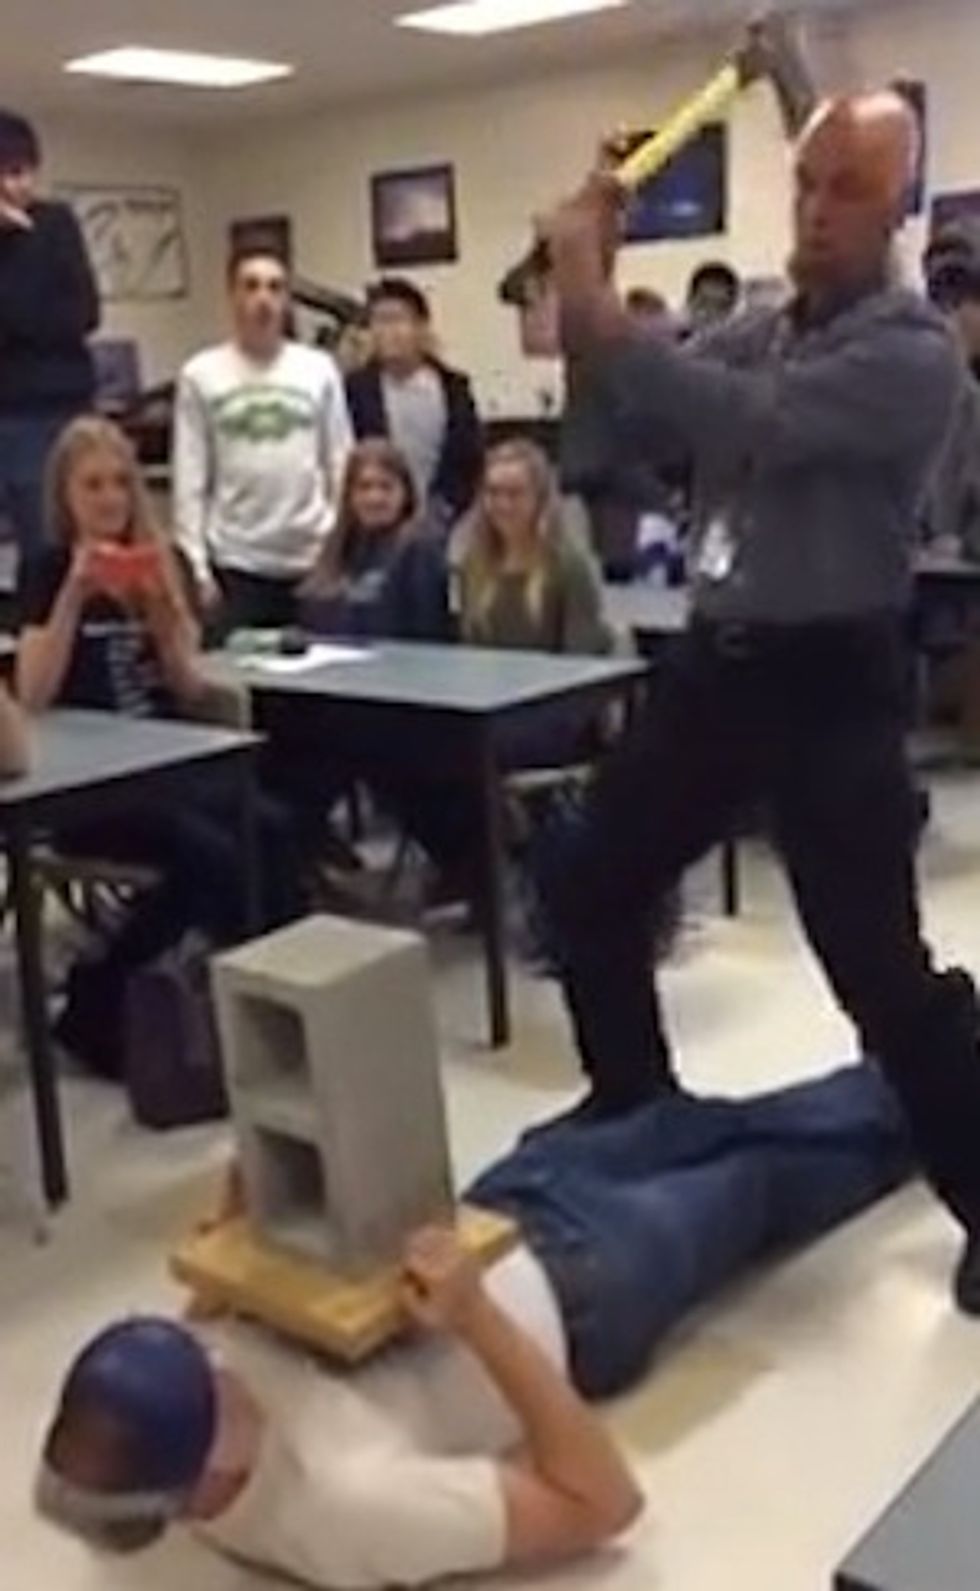 Watch the Ax: Physics Demonstration Appears to Go Horribly Wrong